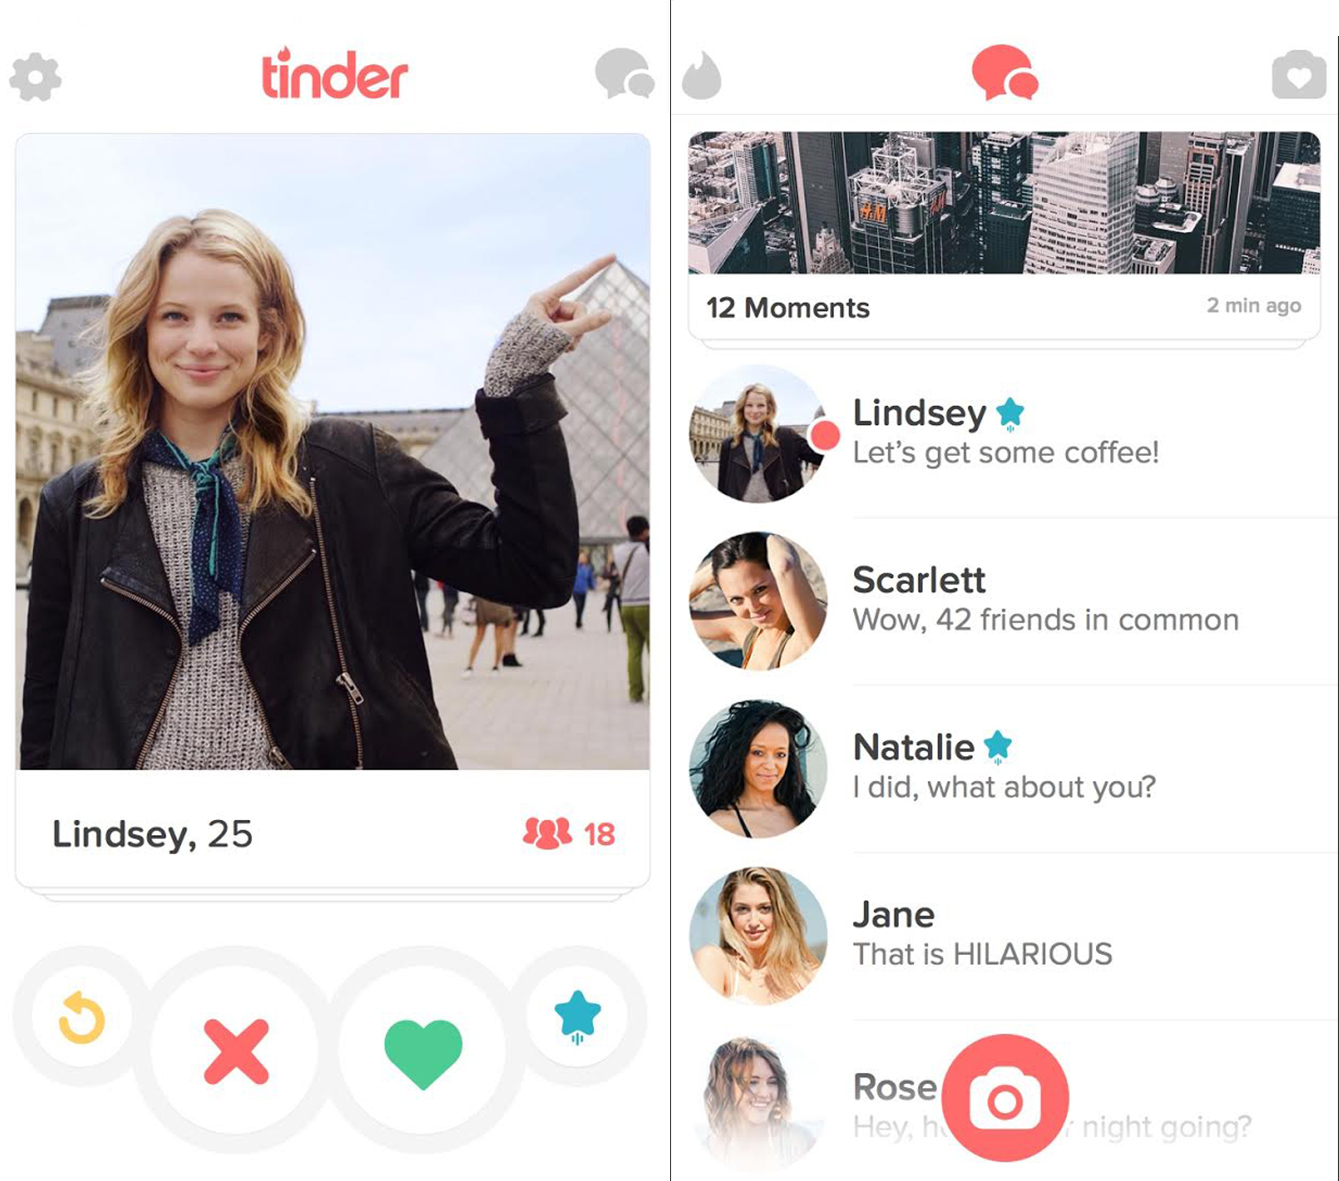 Tinder is judging you - with an algorithm